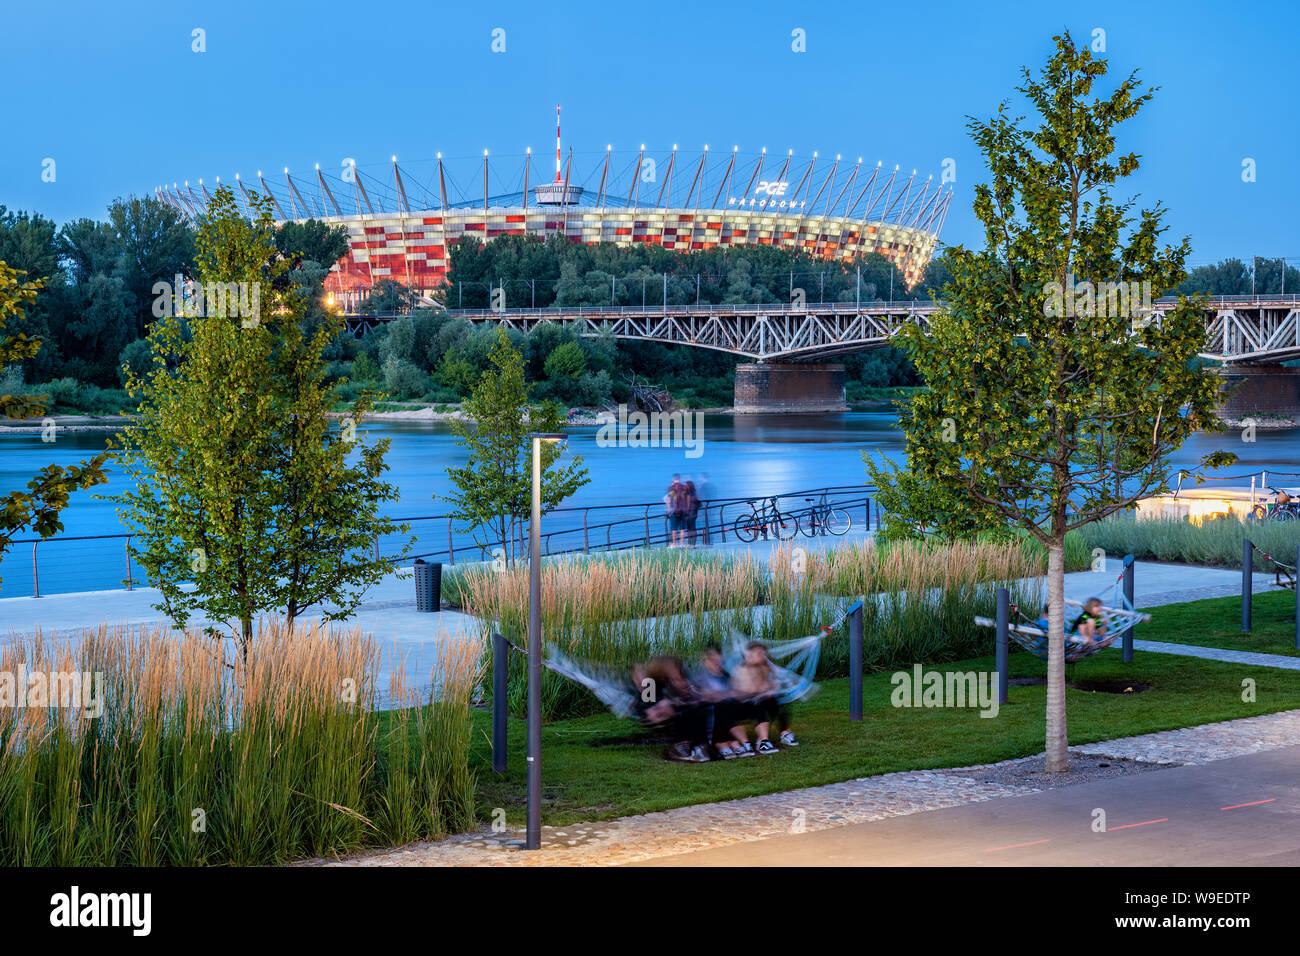 Poland, capital city of Warsaw, people relax on hammocks on the Vistula River boulevards with view to the National Stadium in the evening Stock Photo